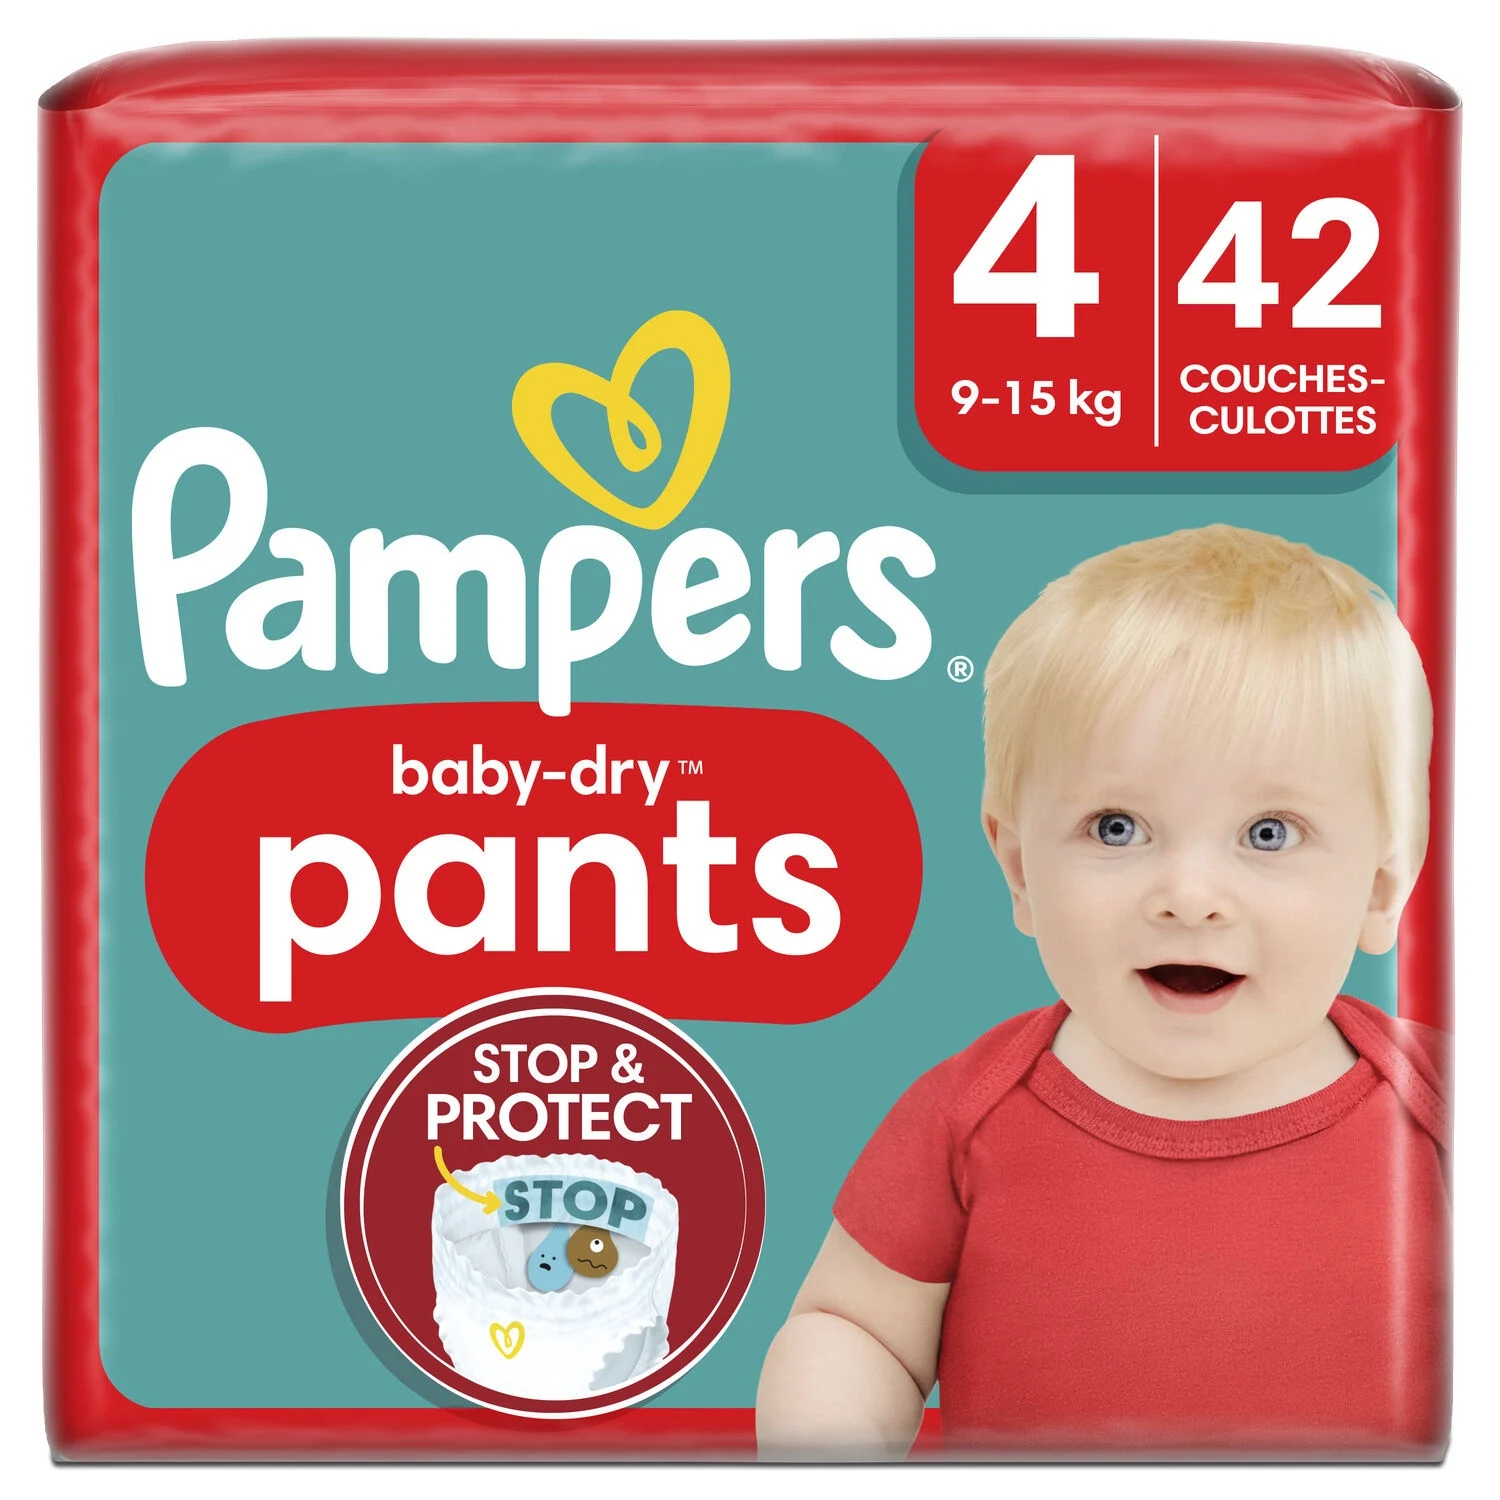 Couches - Culottes Bébé Baby Dry Taille 4, 42 - PAMPERS